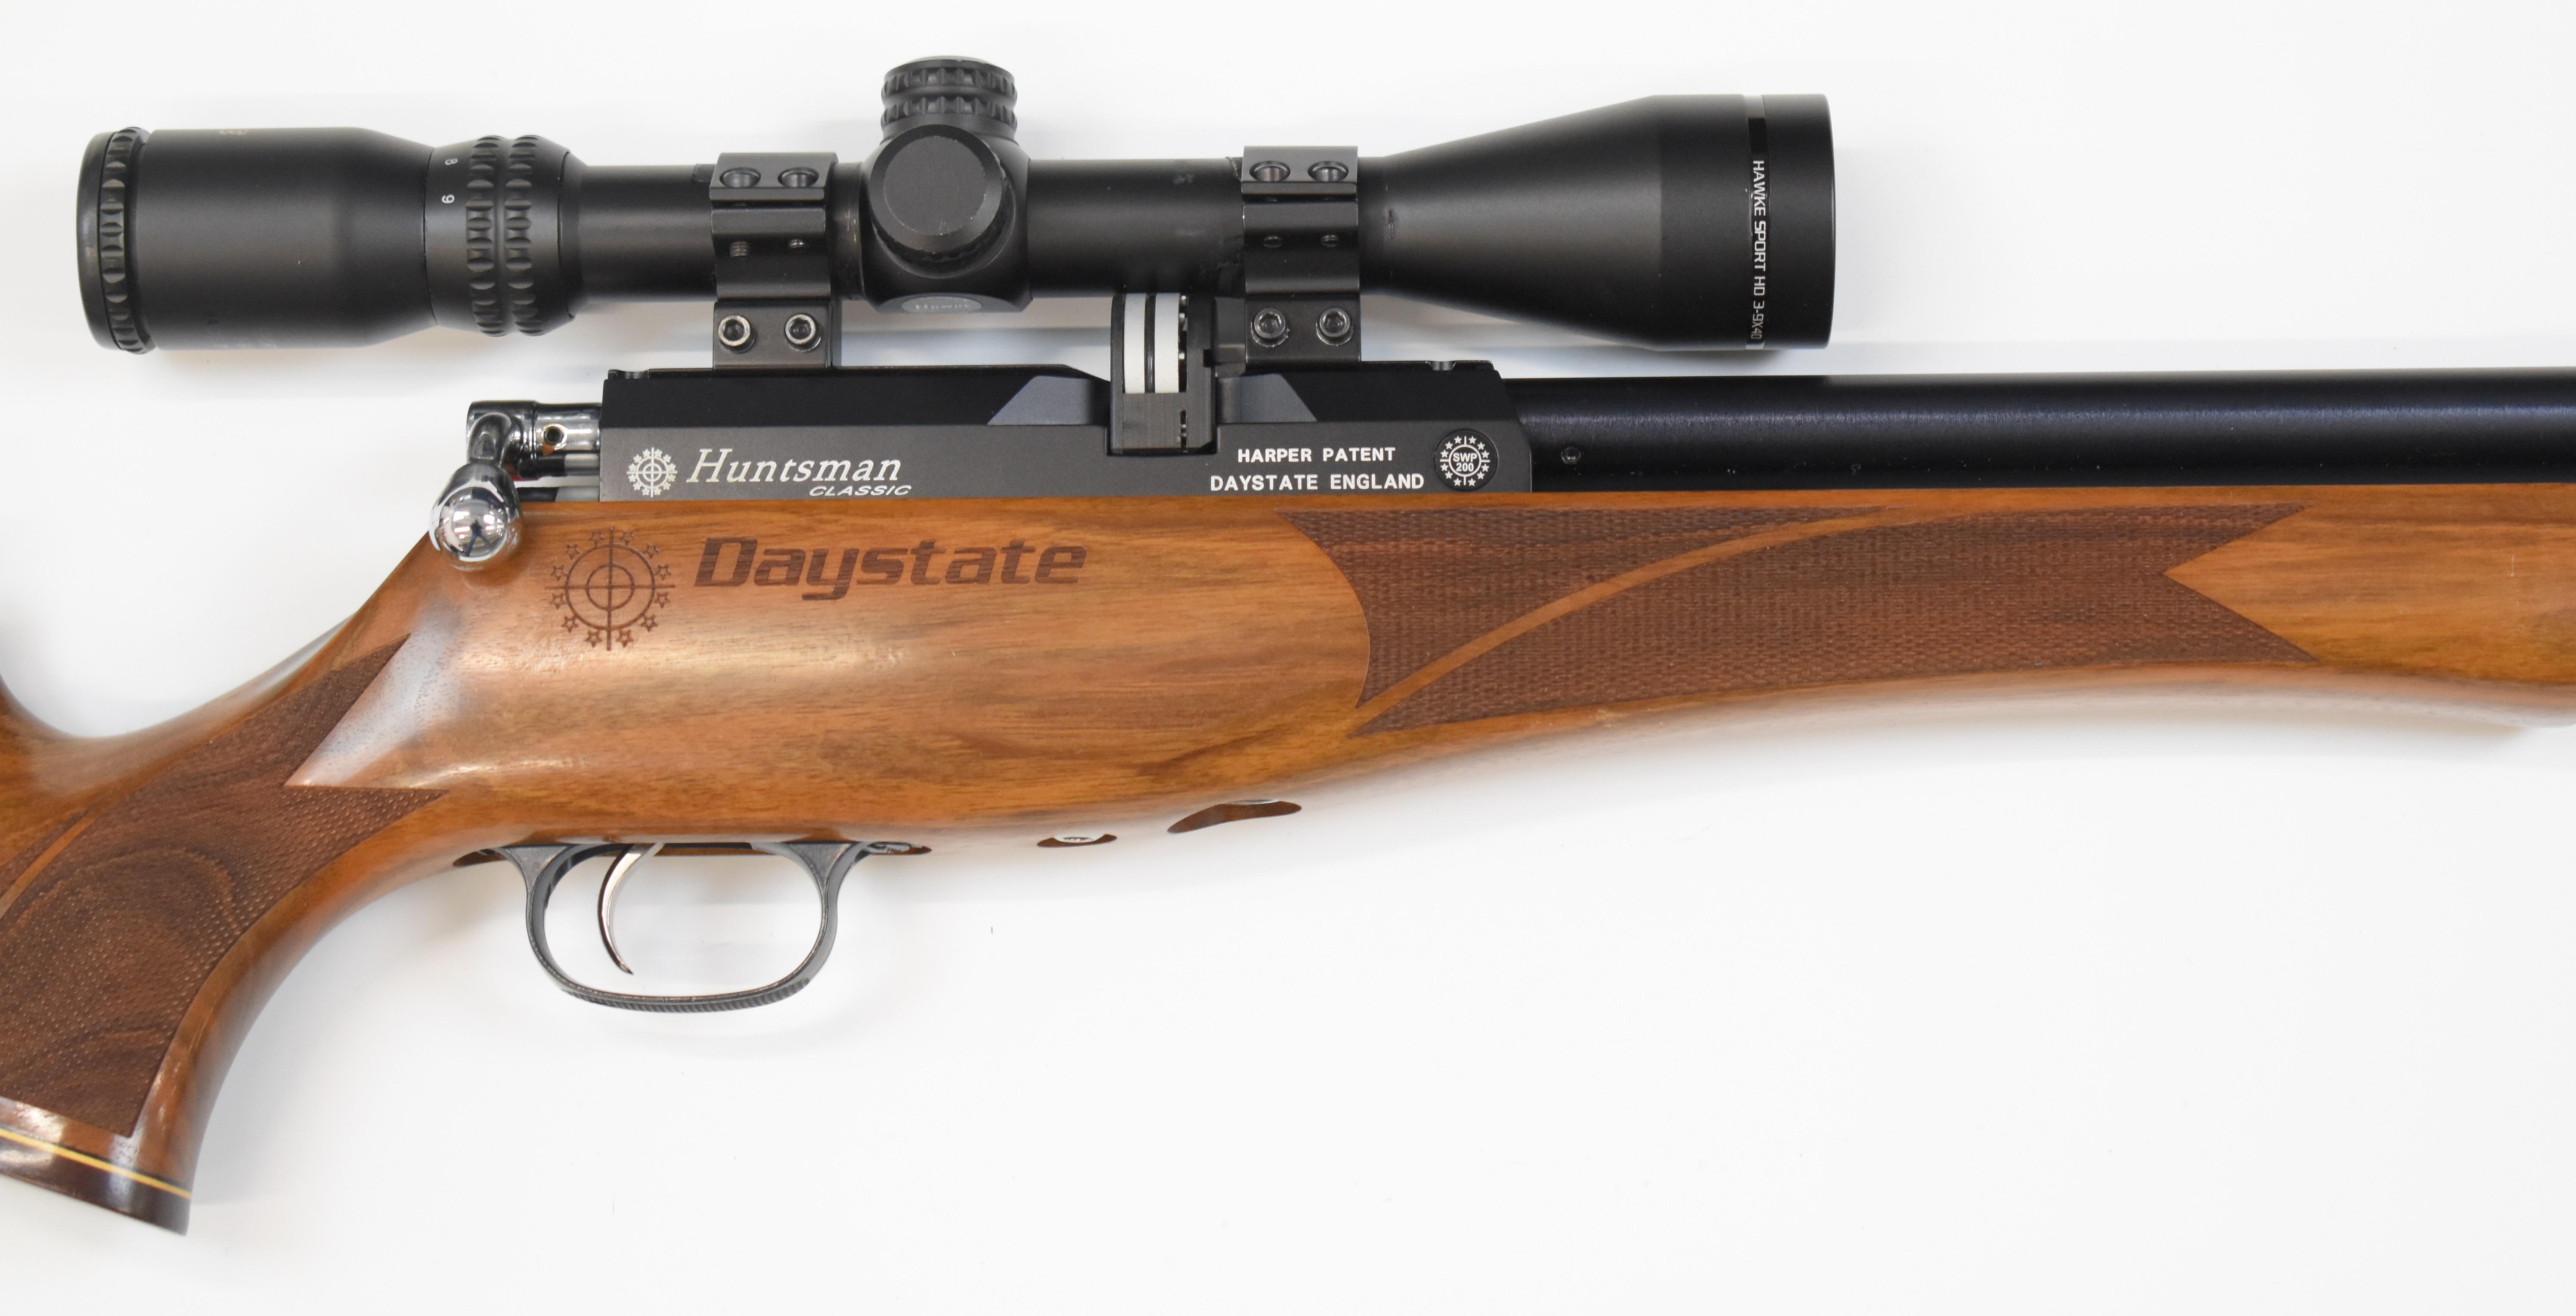 Daystate Huntsman Classic .177 PCP air rifle with monogrammed and chequered semi-pistol grip, - Image 4 of 9